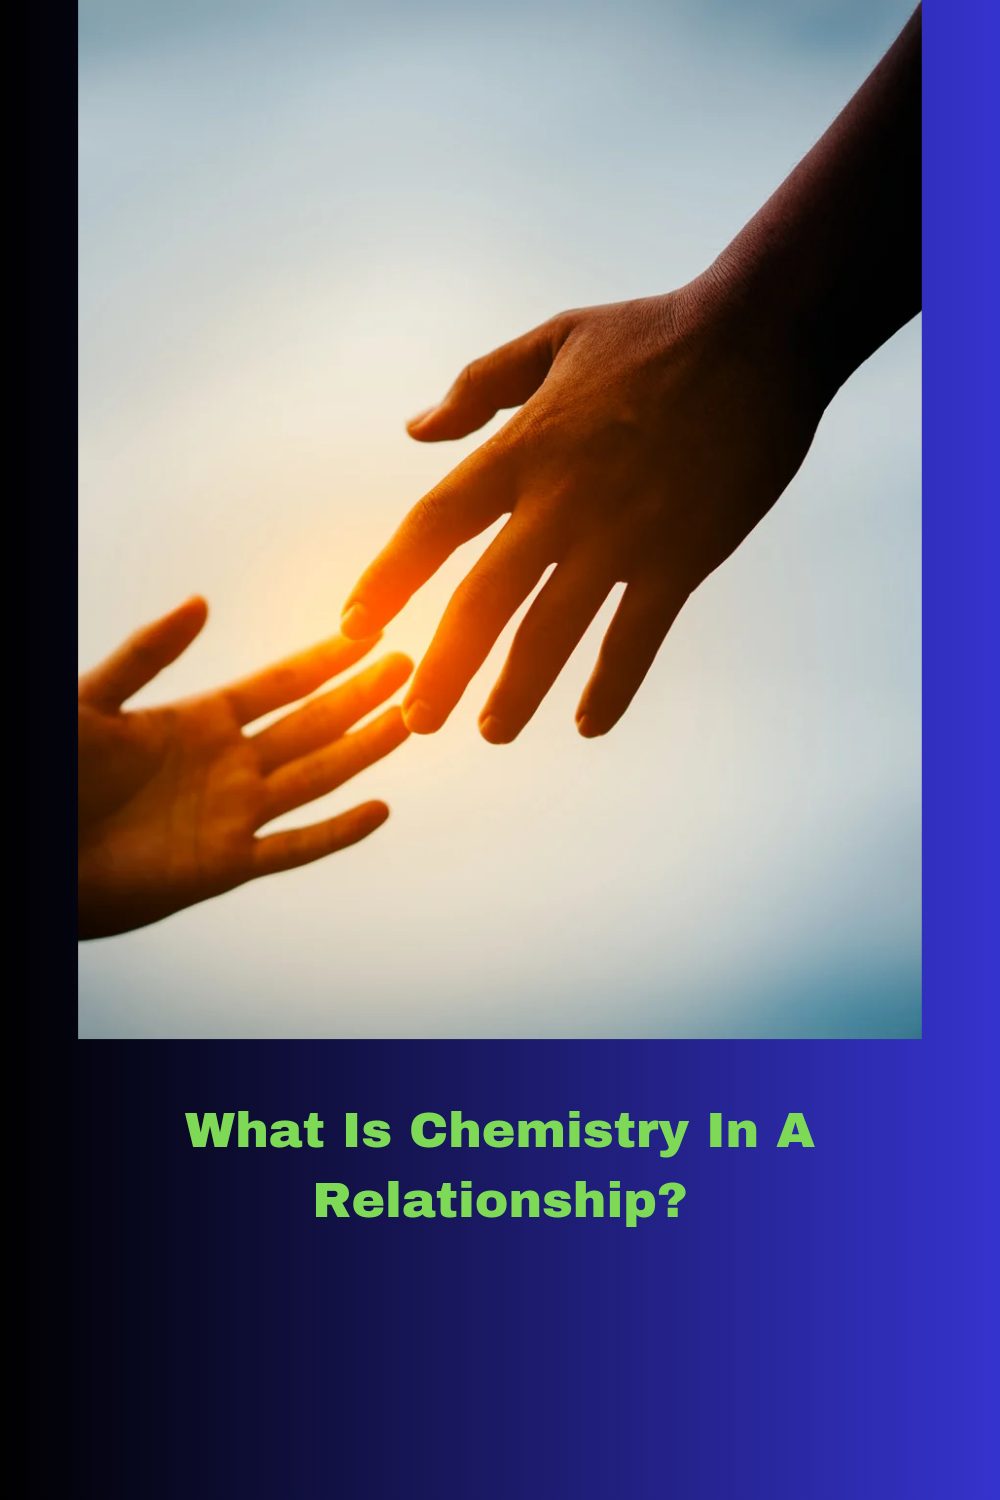 What Is Chemistry In A Relationship?